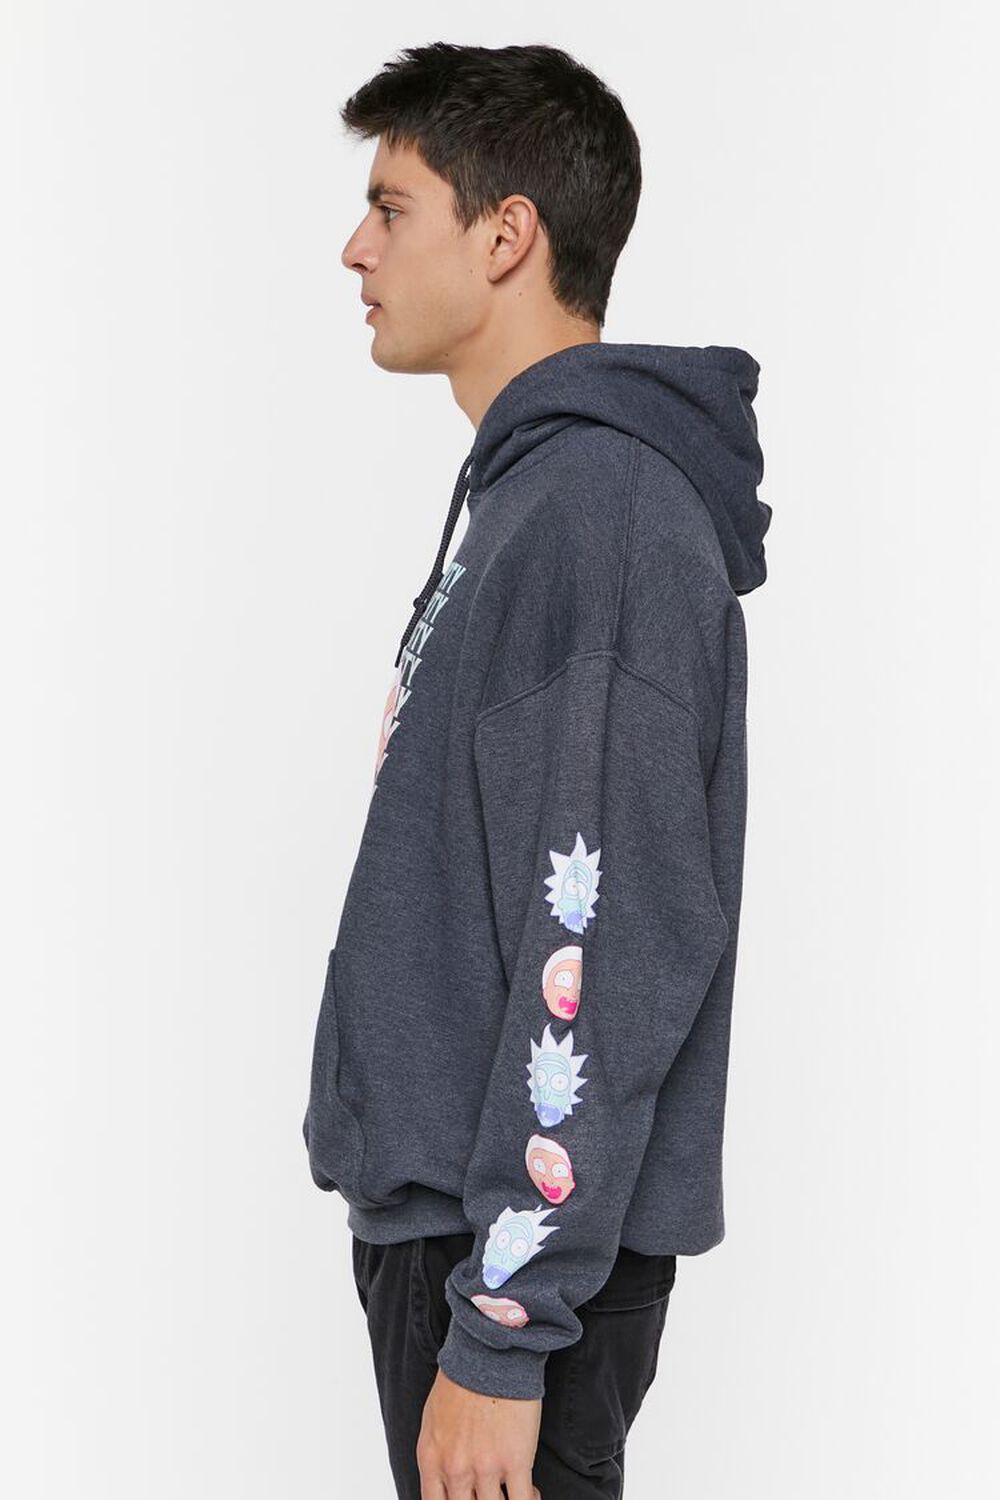 CHARCOAL/MULTI Rick & Morty Graphic Hoodie, image 2